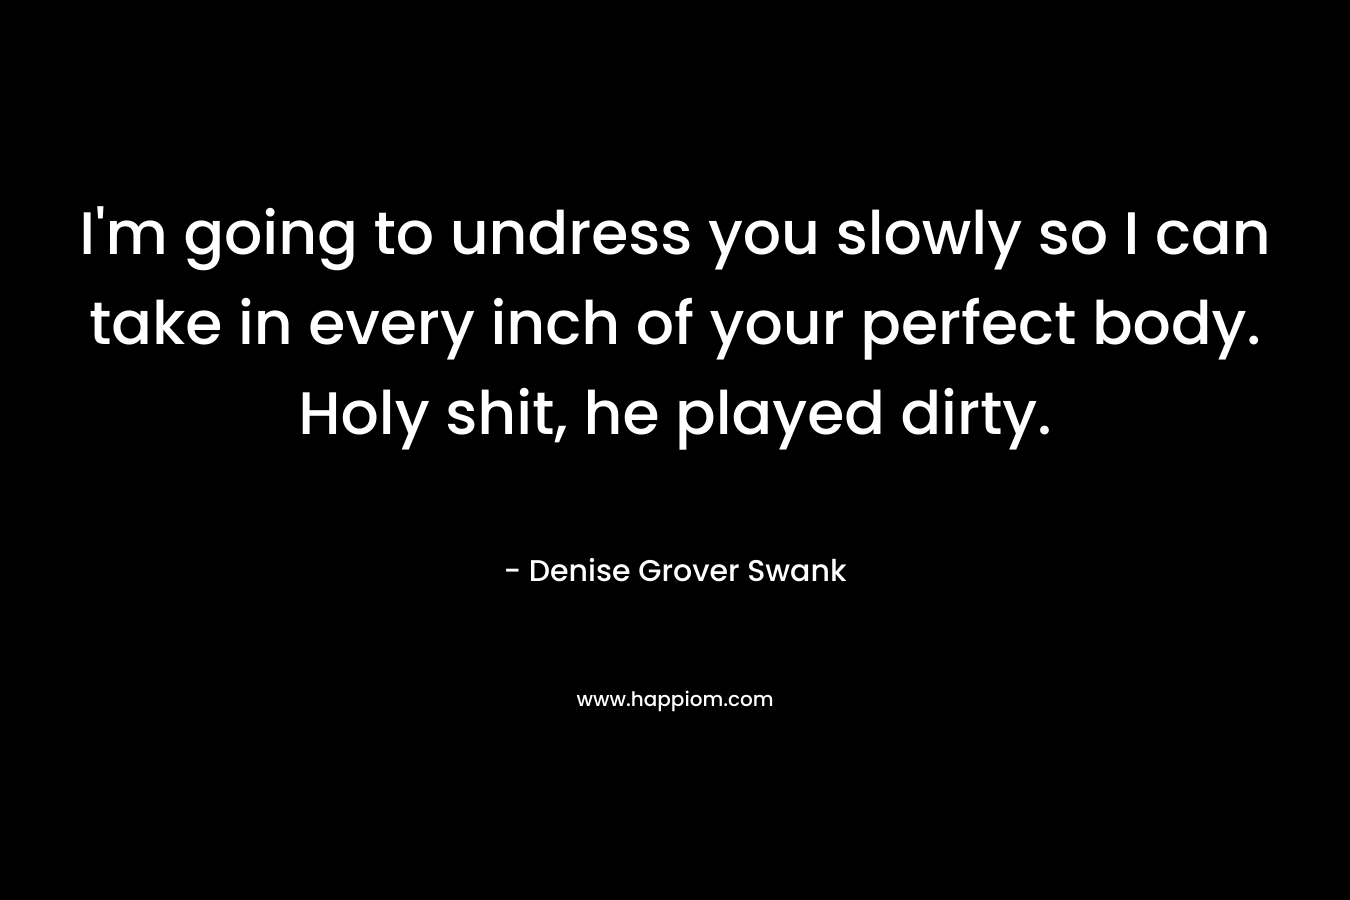 I’m going to undress you slowly so I can take in every inch of your perfect body. Holy shit, he played dirty. – Denise Grover Swank